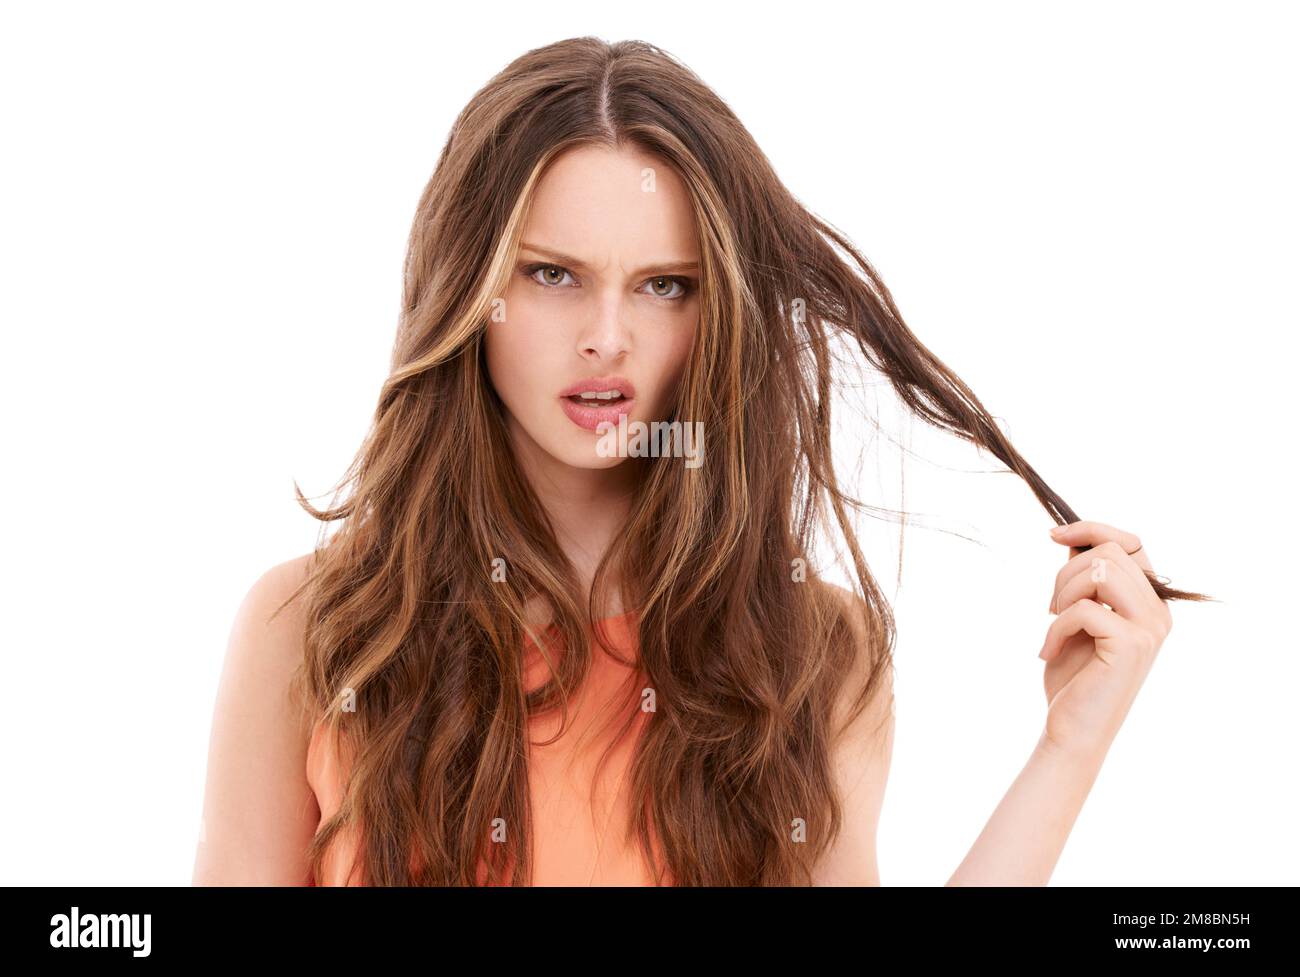 Woman portrait, stress or angry with messy hairstyle on isolated white background for split ends, keratin treatment or grooming. Confused beauty model Stock Photo